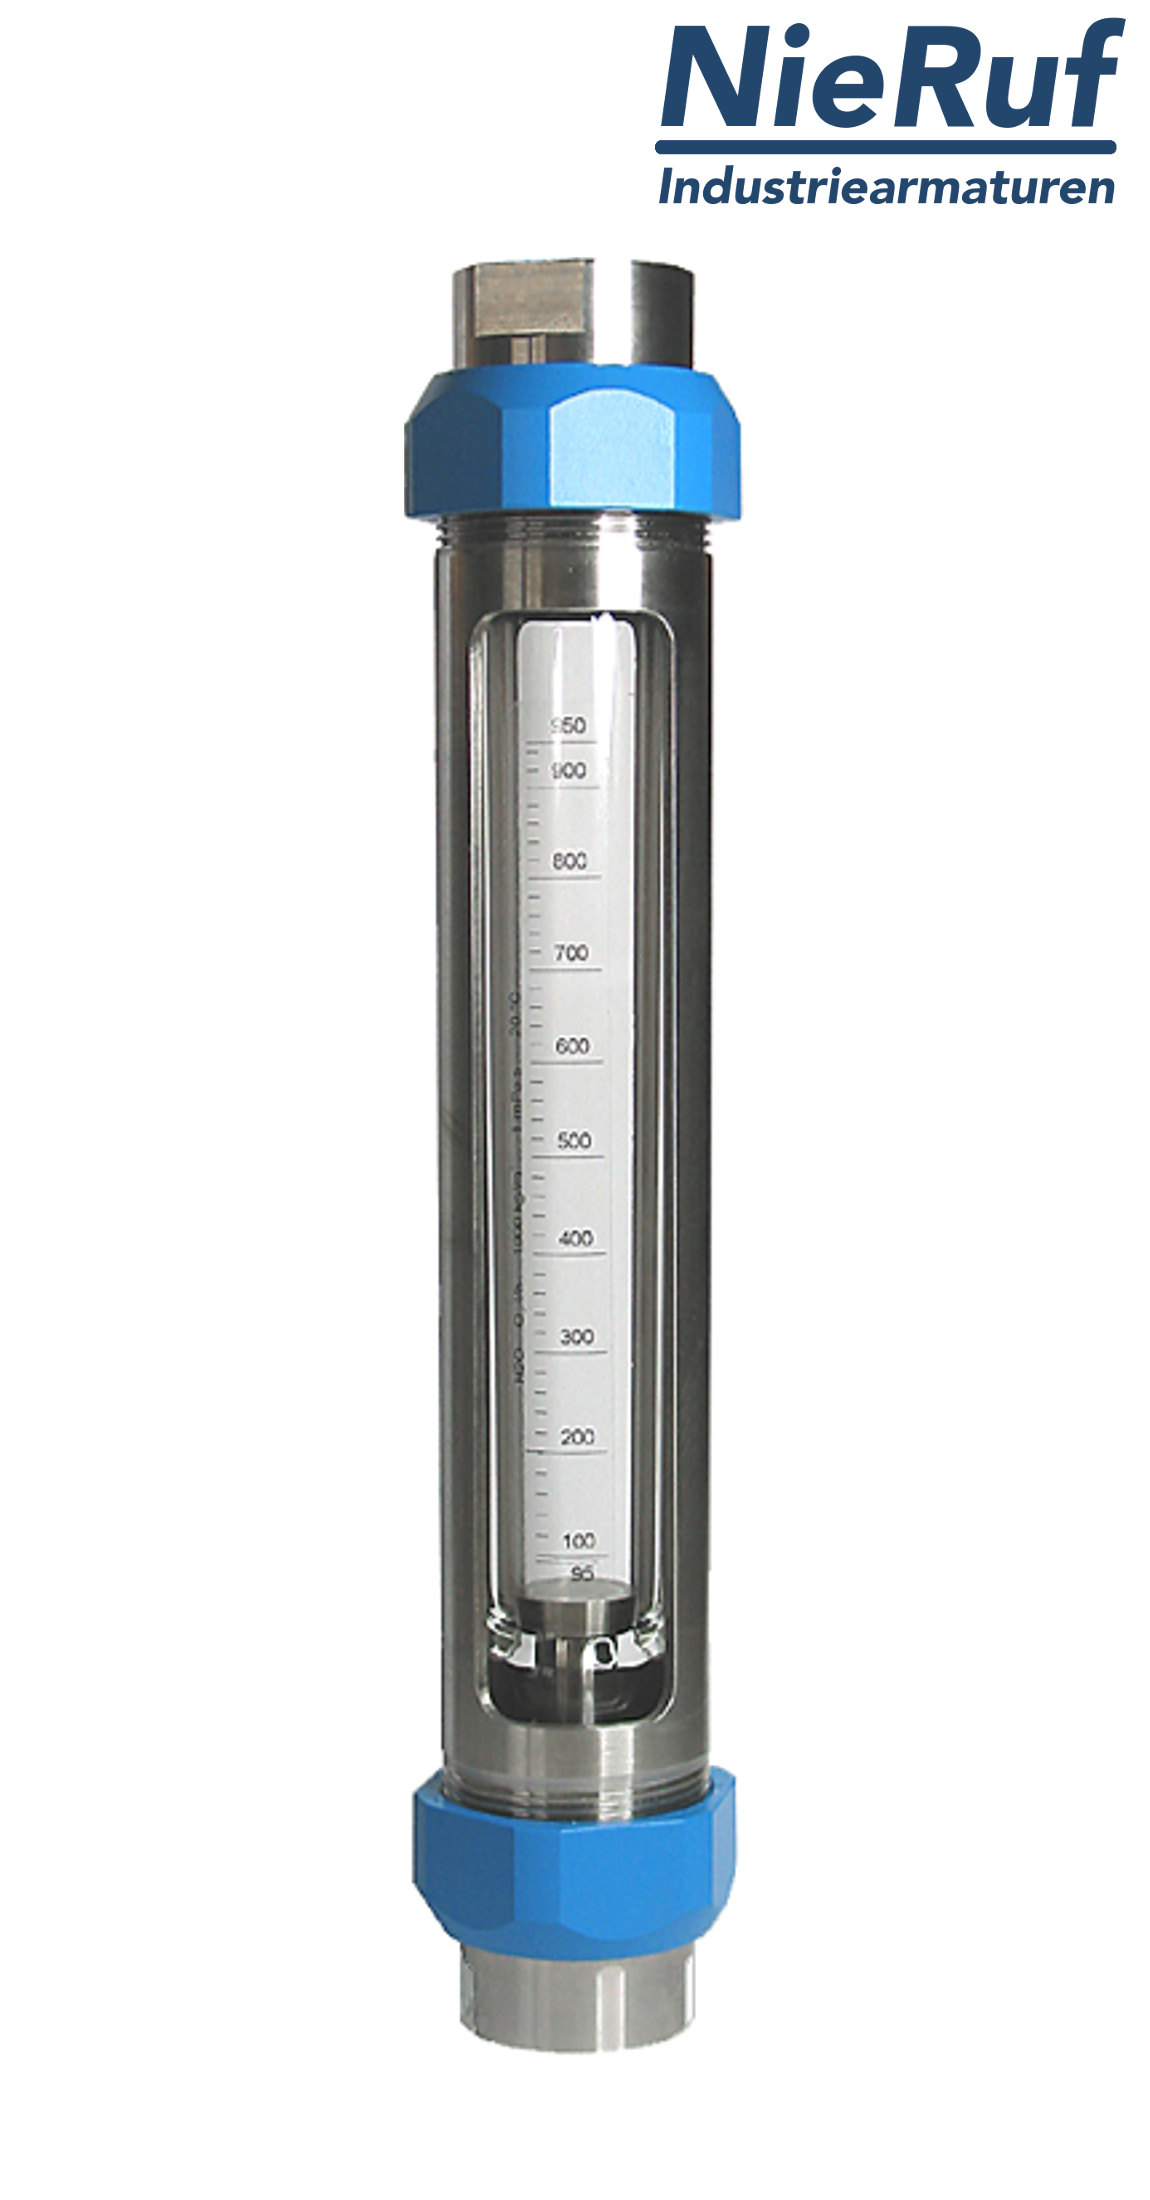 Variable area flowmeter stainless steel + borosilicate 1 1/4" inch 120000.0 - 350000.0 l/h air EPDM